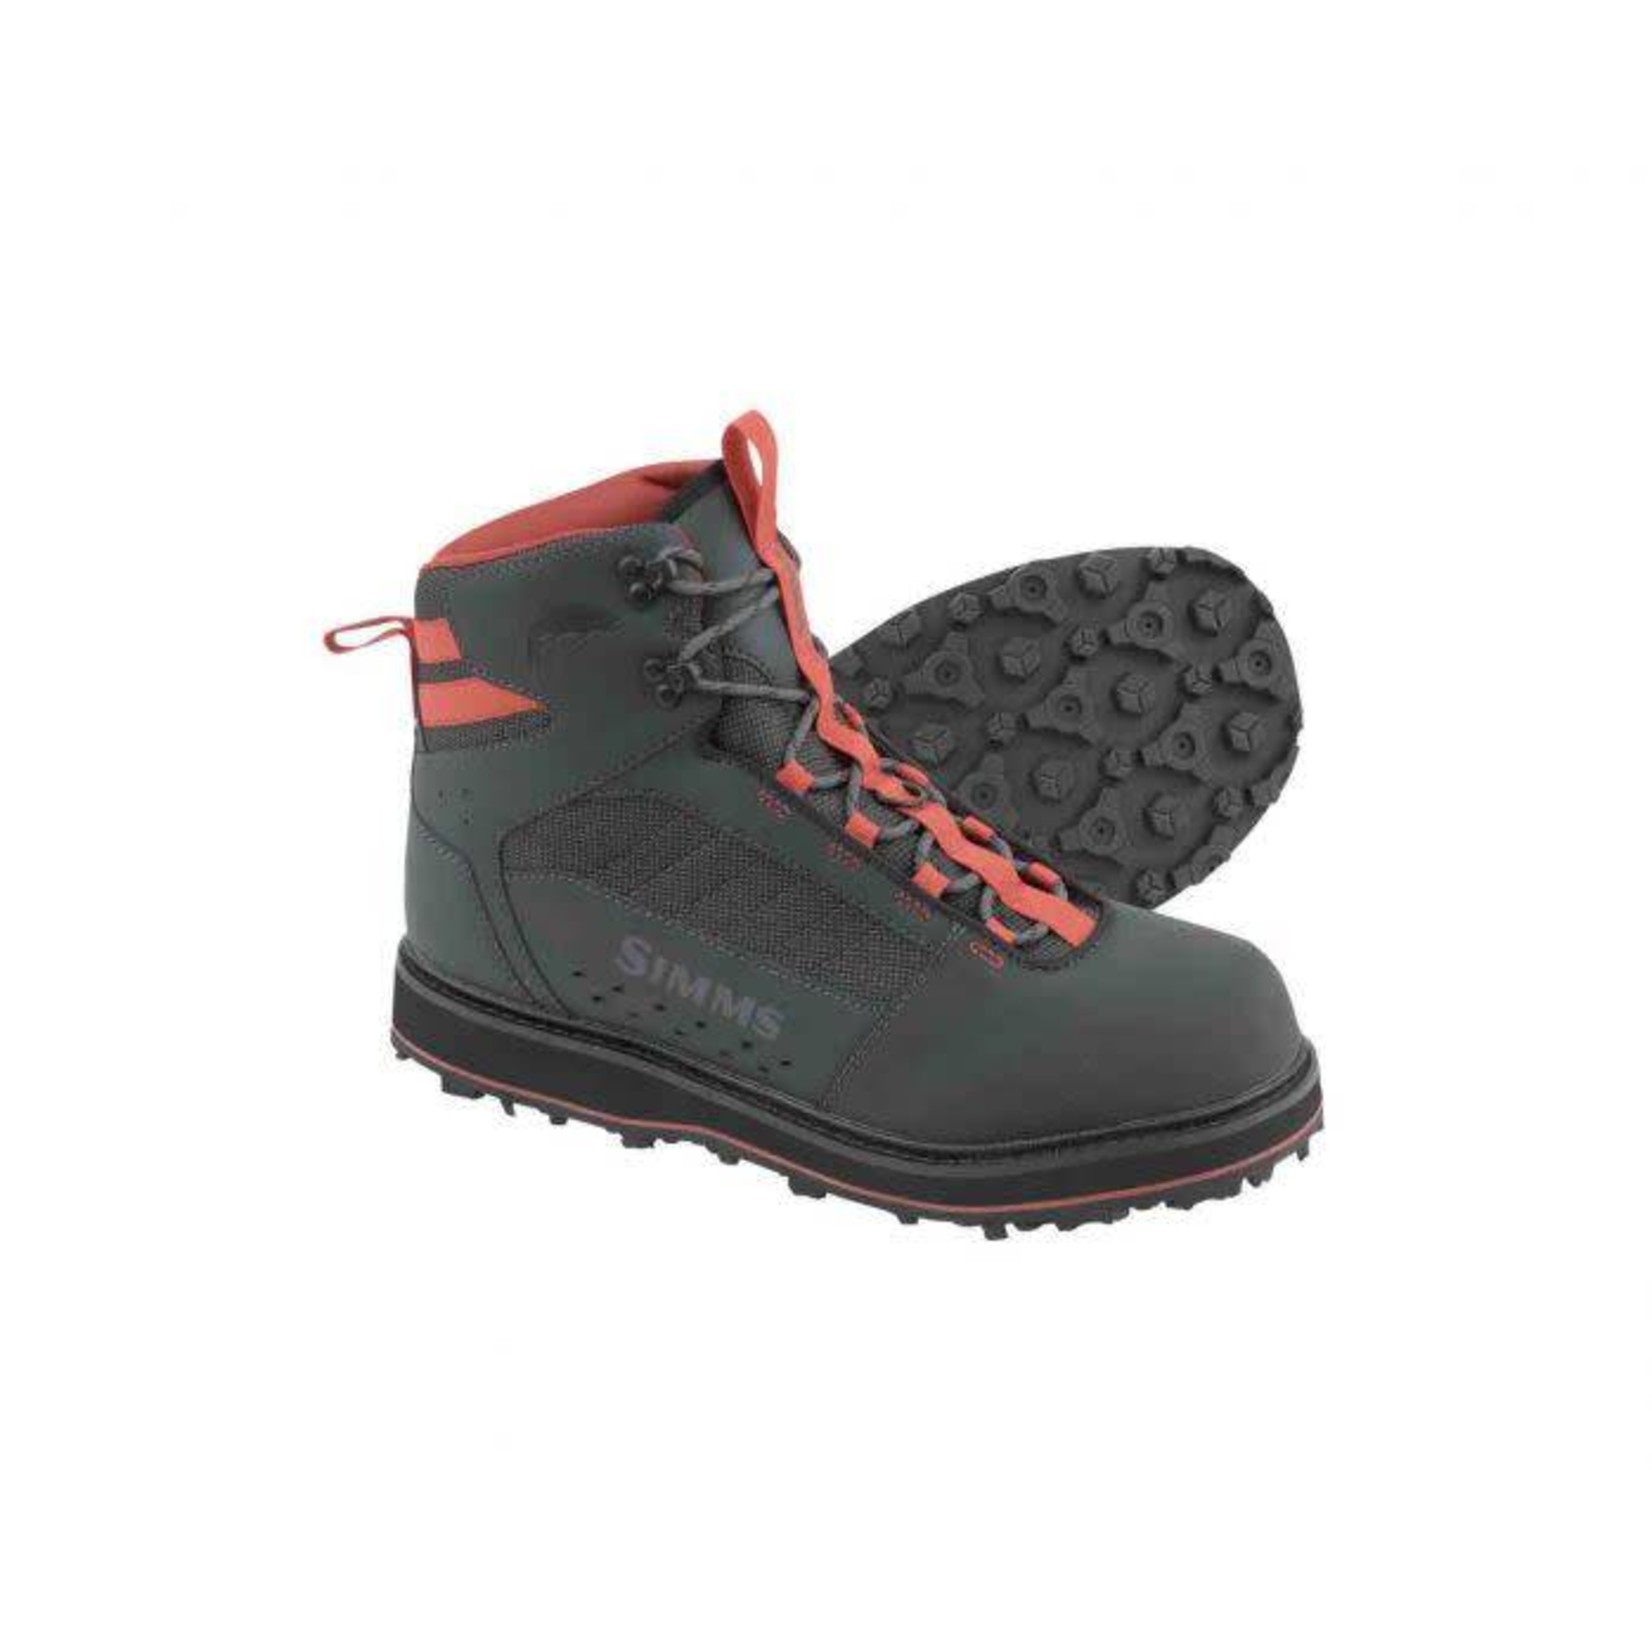 Simms Tributary Wading Boot -